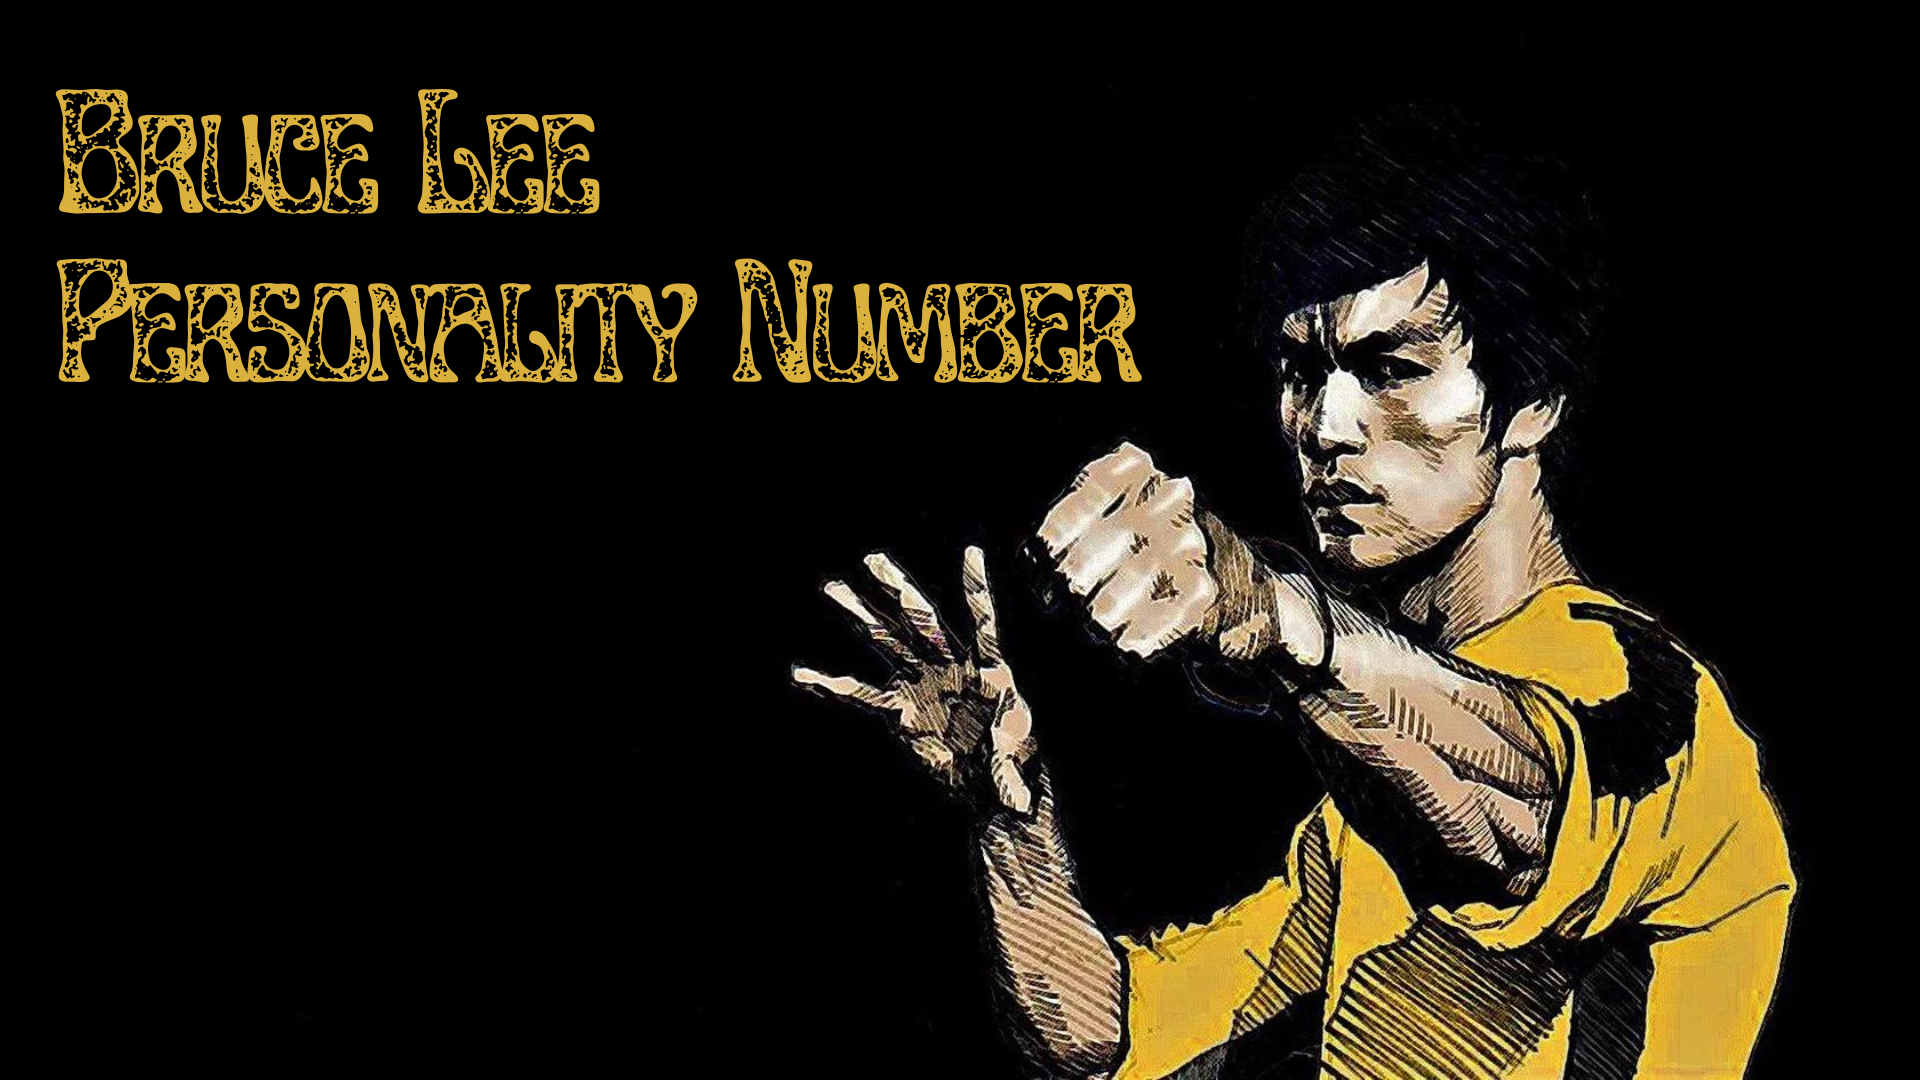 Bruce Lee wearing yellow shirt while doing martial arts stance with words Bruce Lee Personality Number